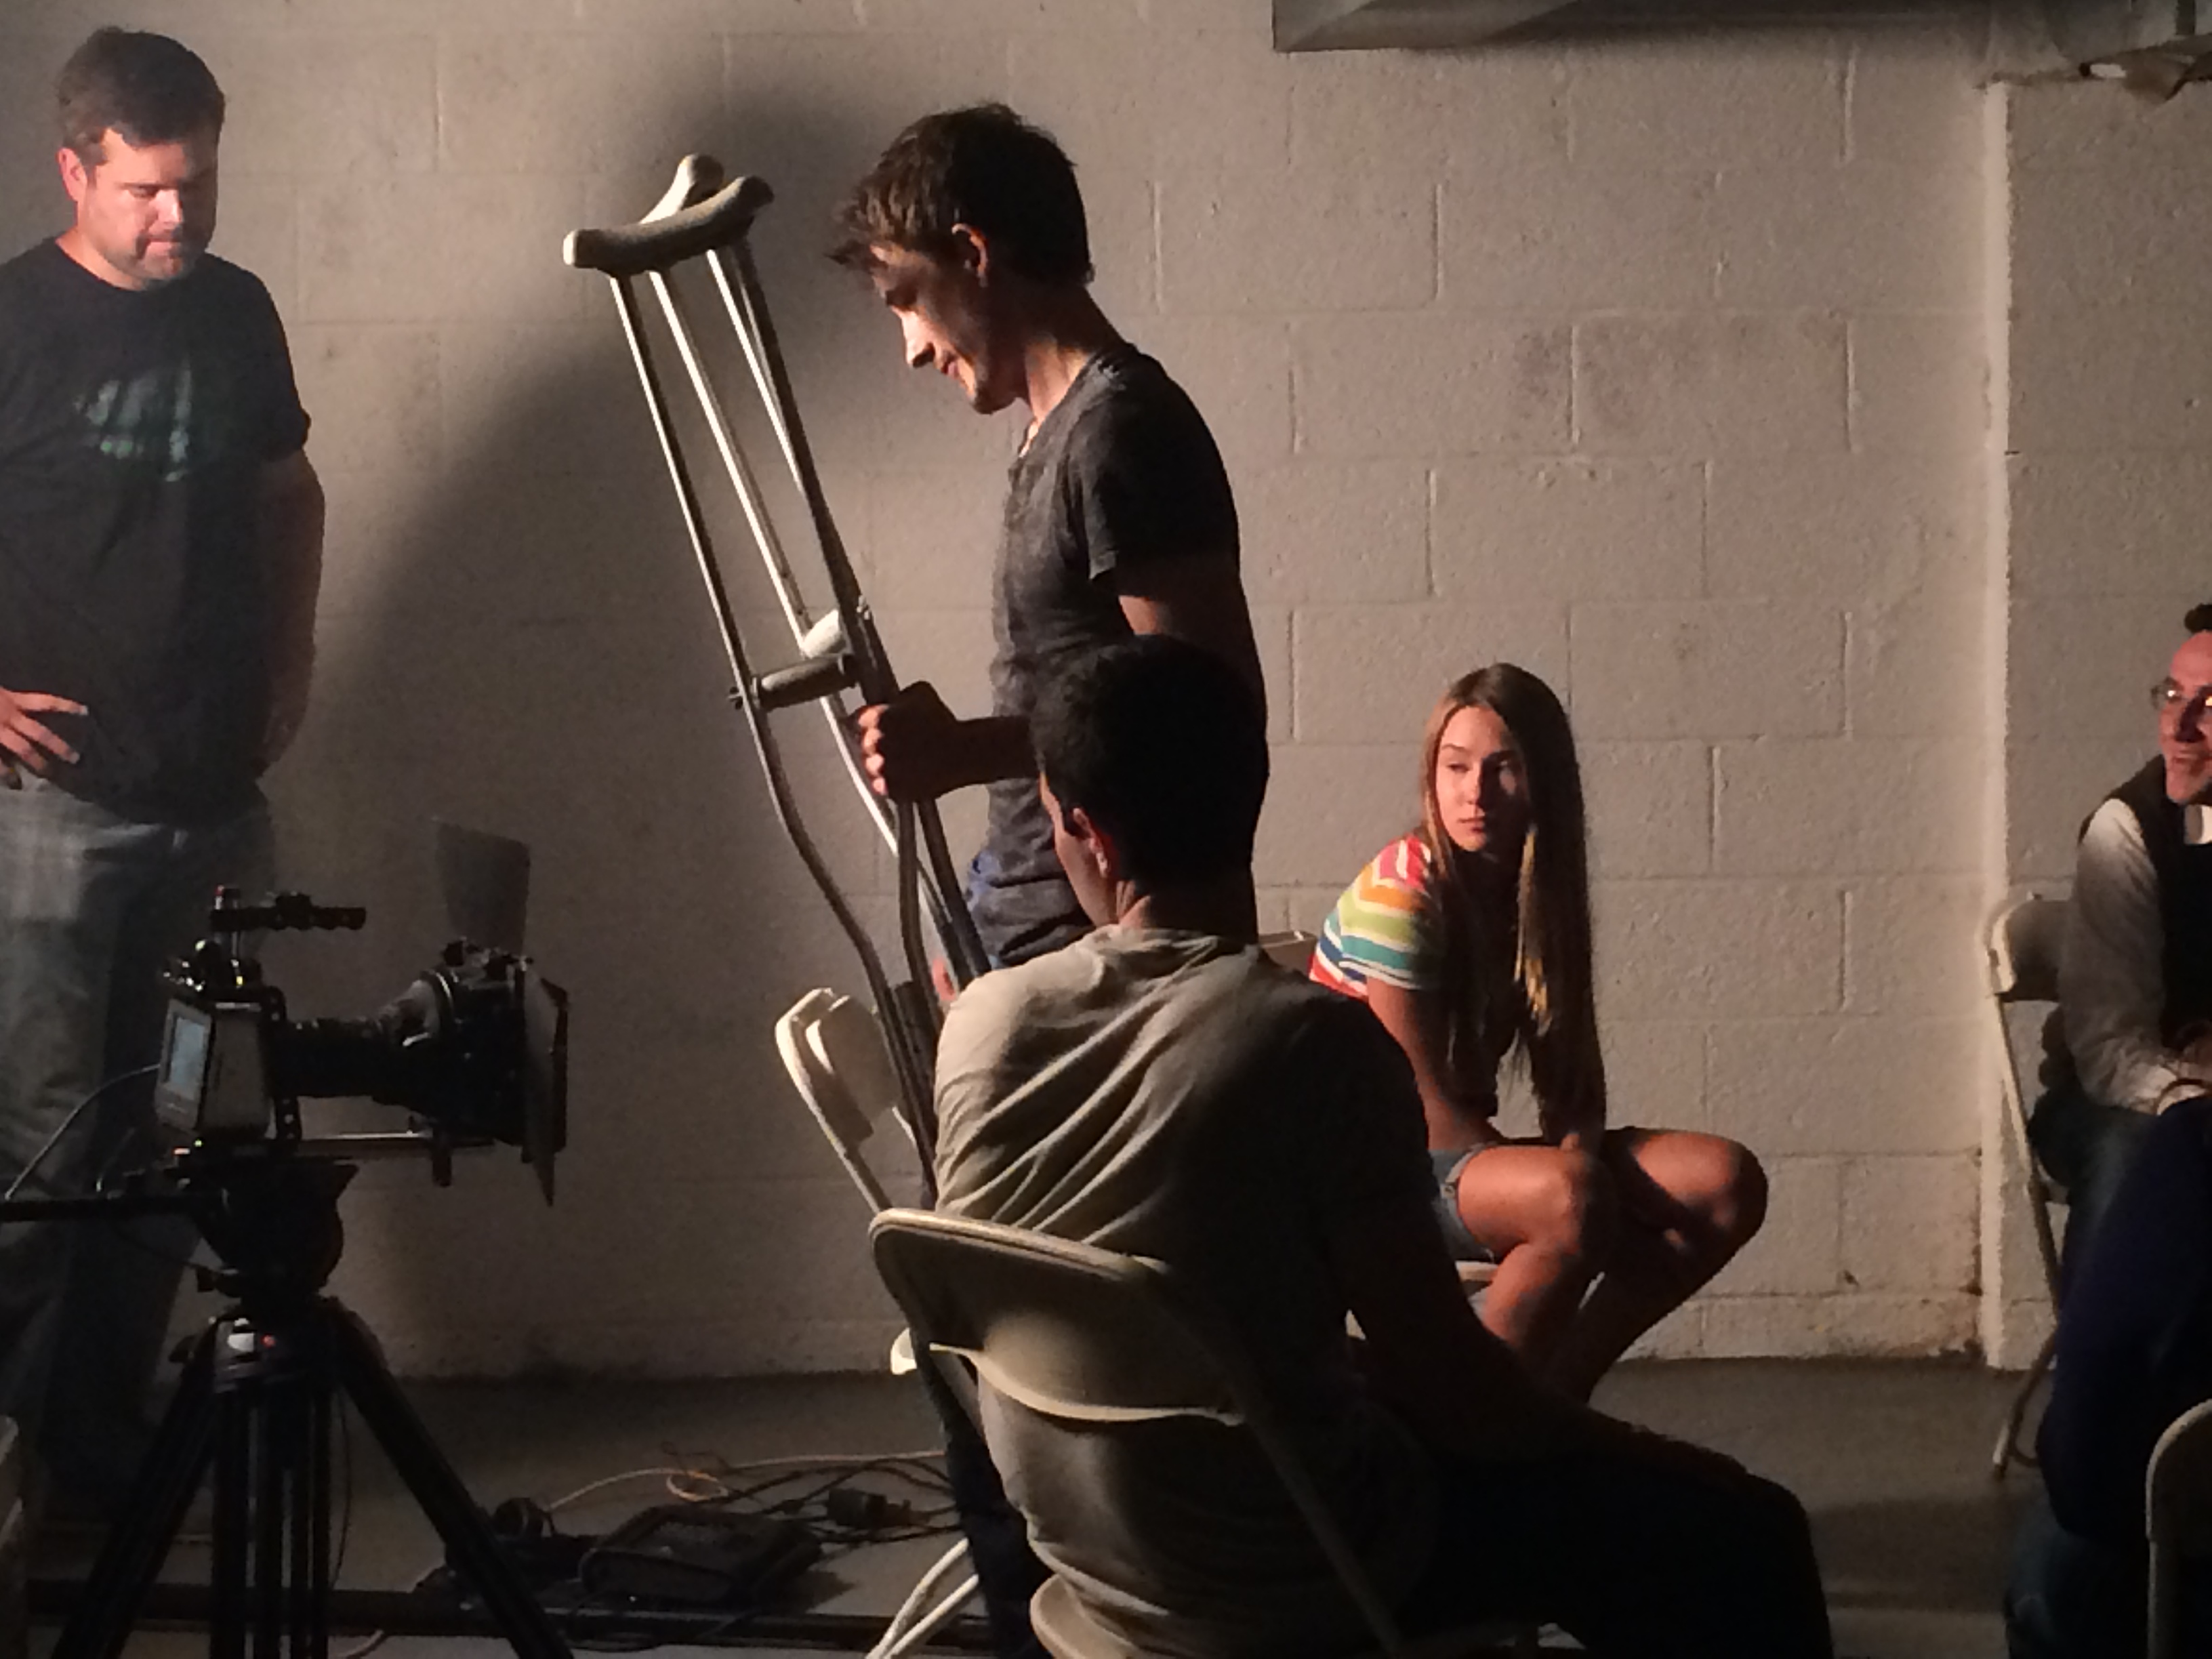 Kylie shooting a scene from 